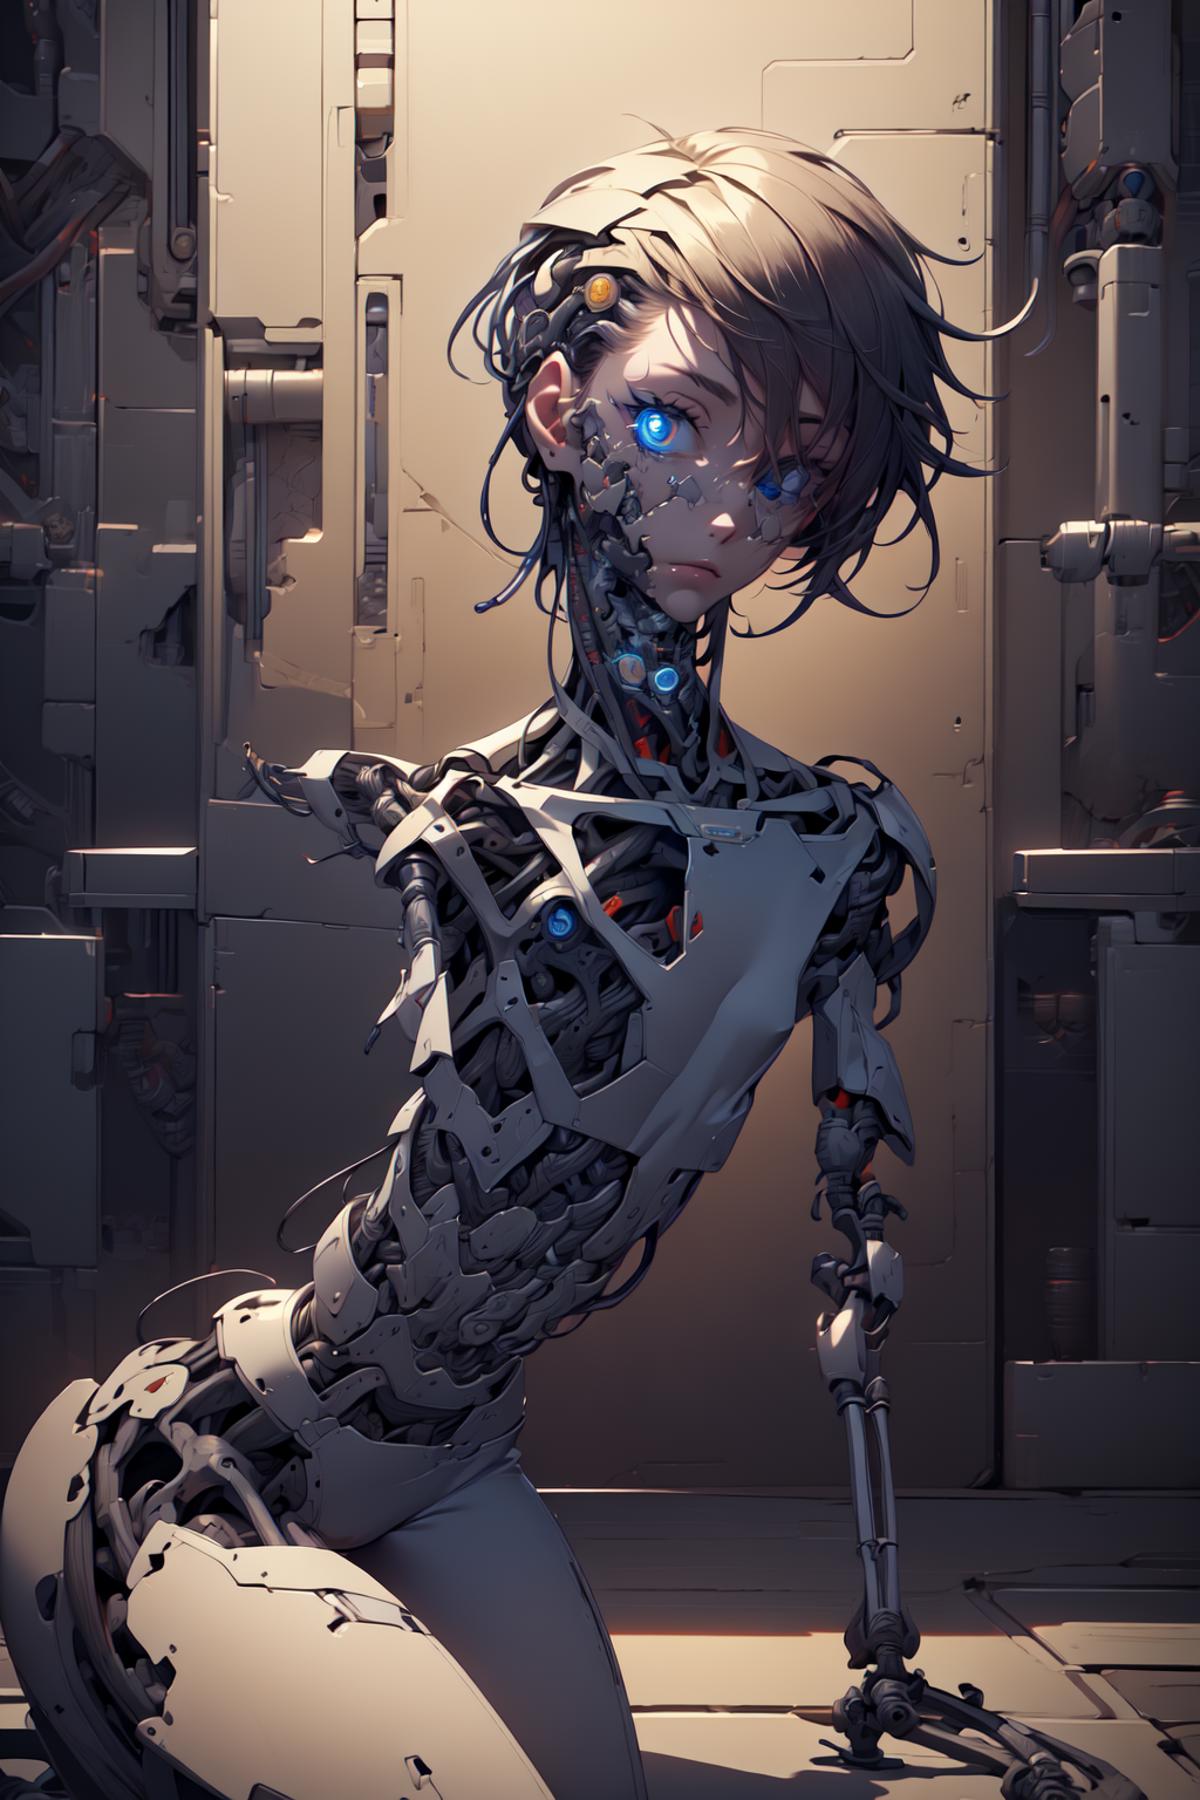 Real Mechanical Parts image by bankenichi